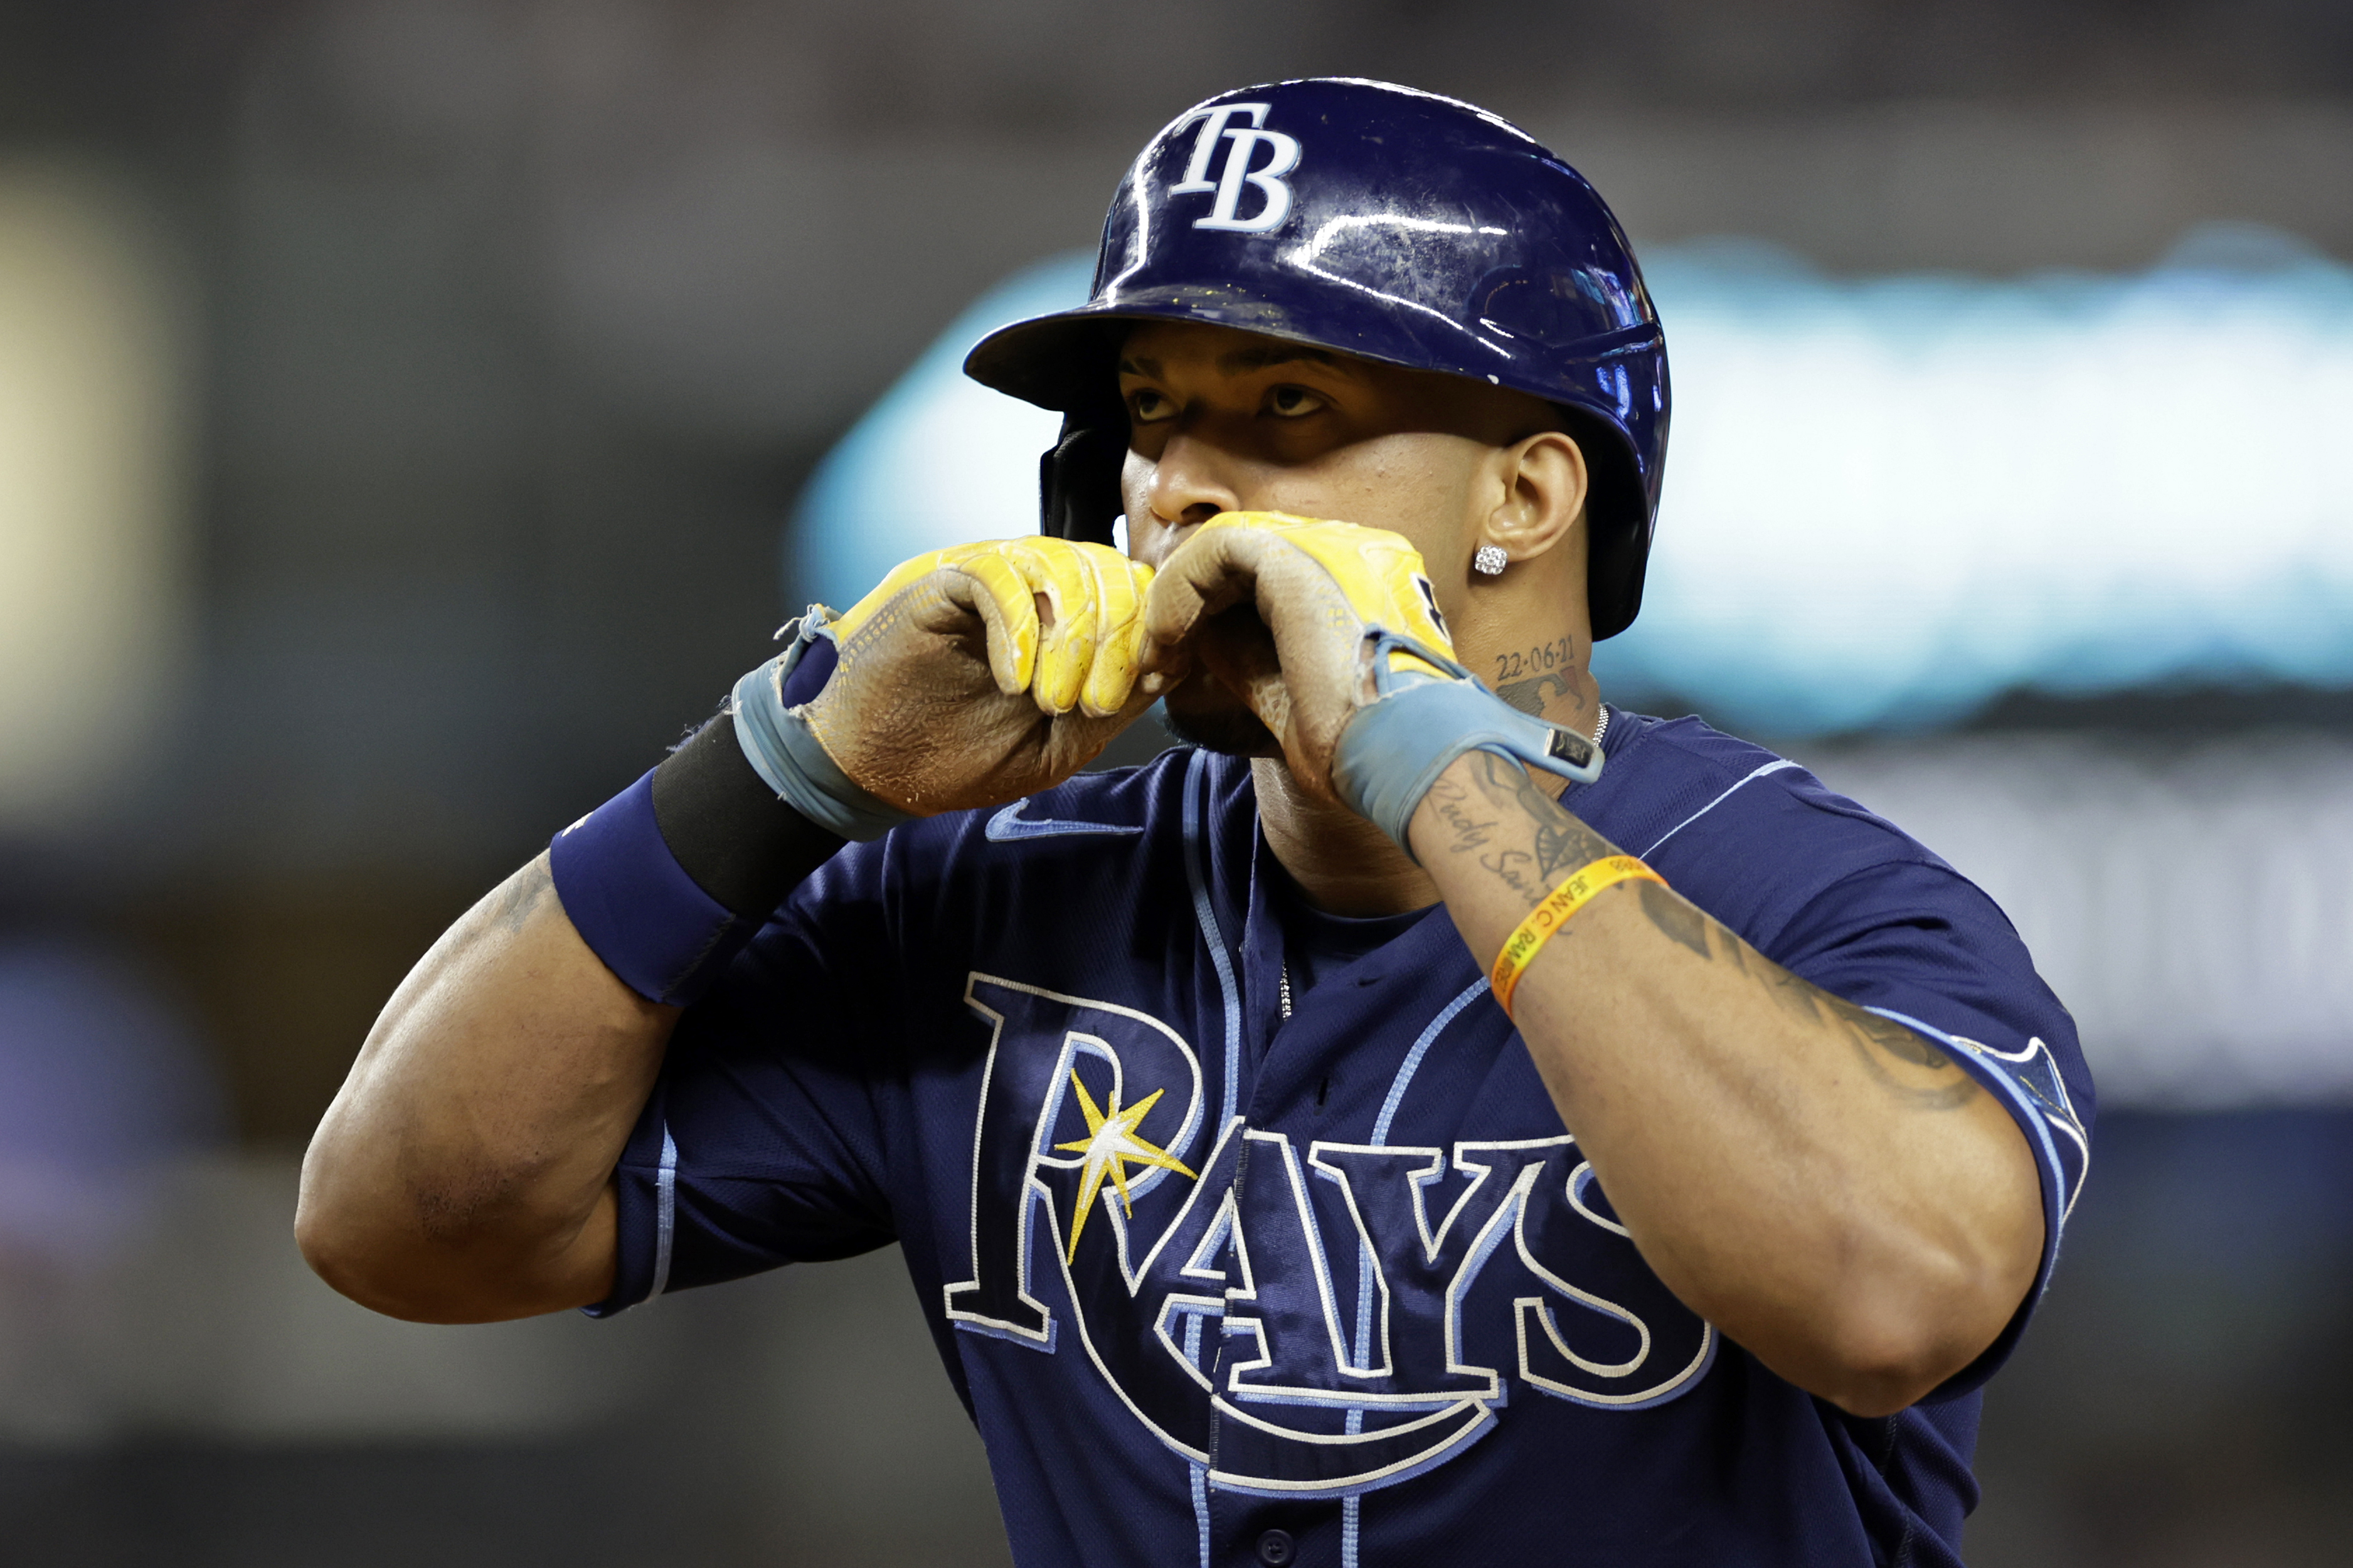 The Wander Franco-less Rays refuse yankees mlb jersey 54 to go